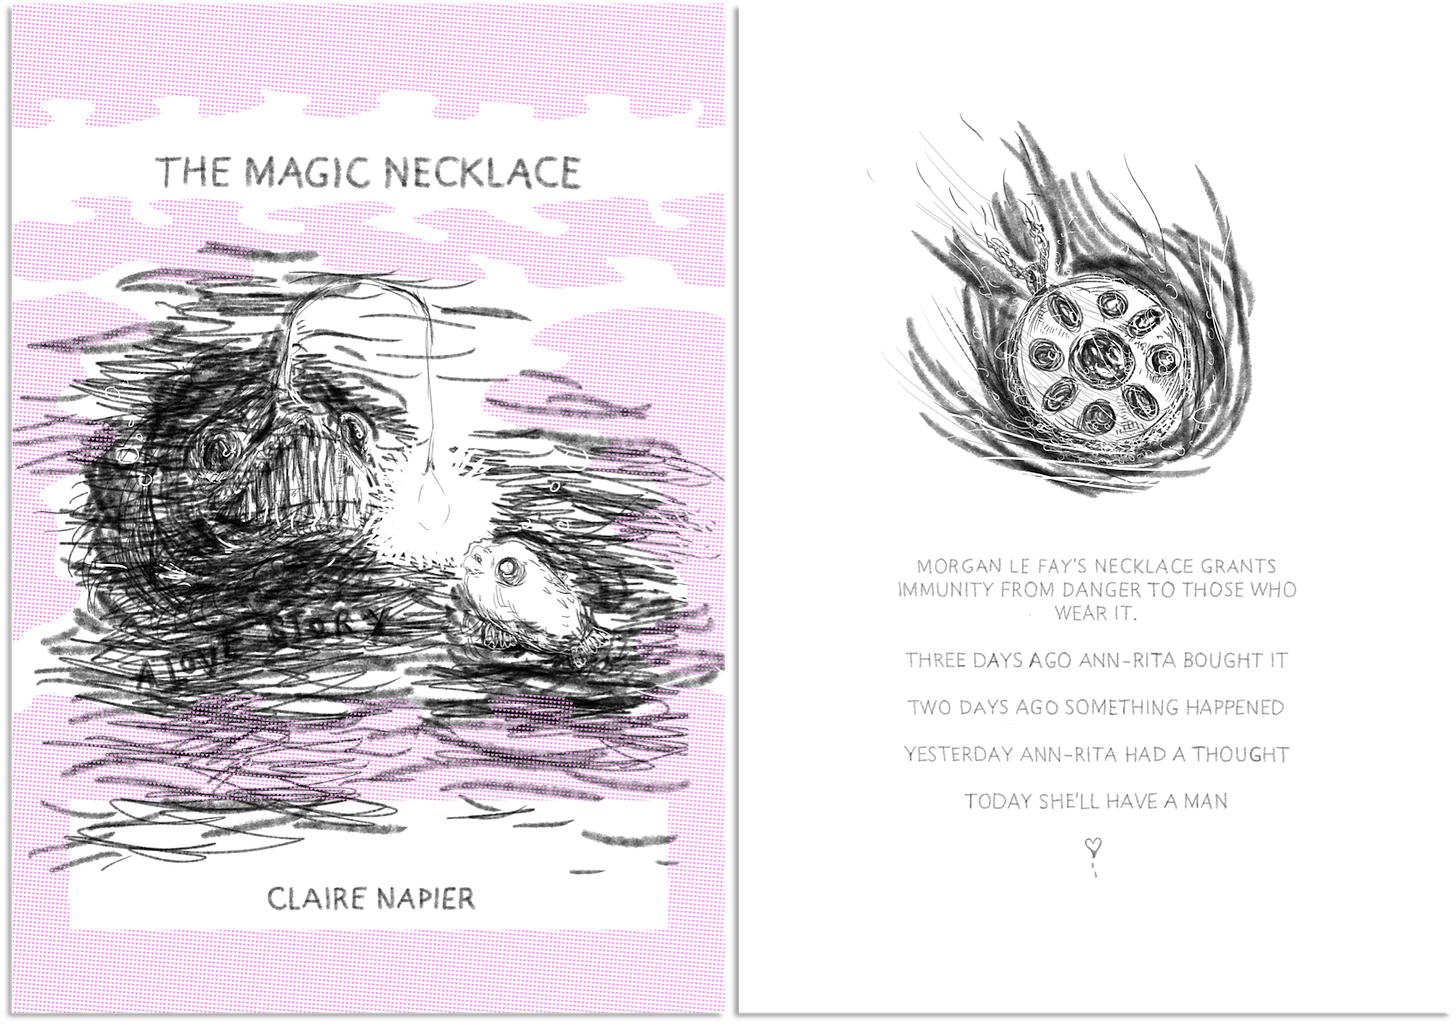 The cover and summary of The Magic Necklace.